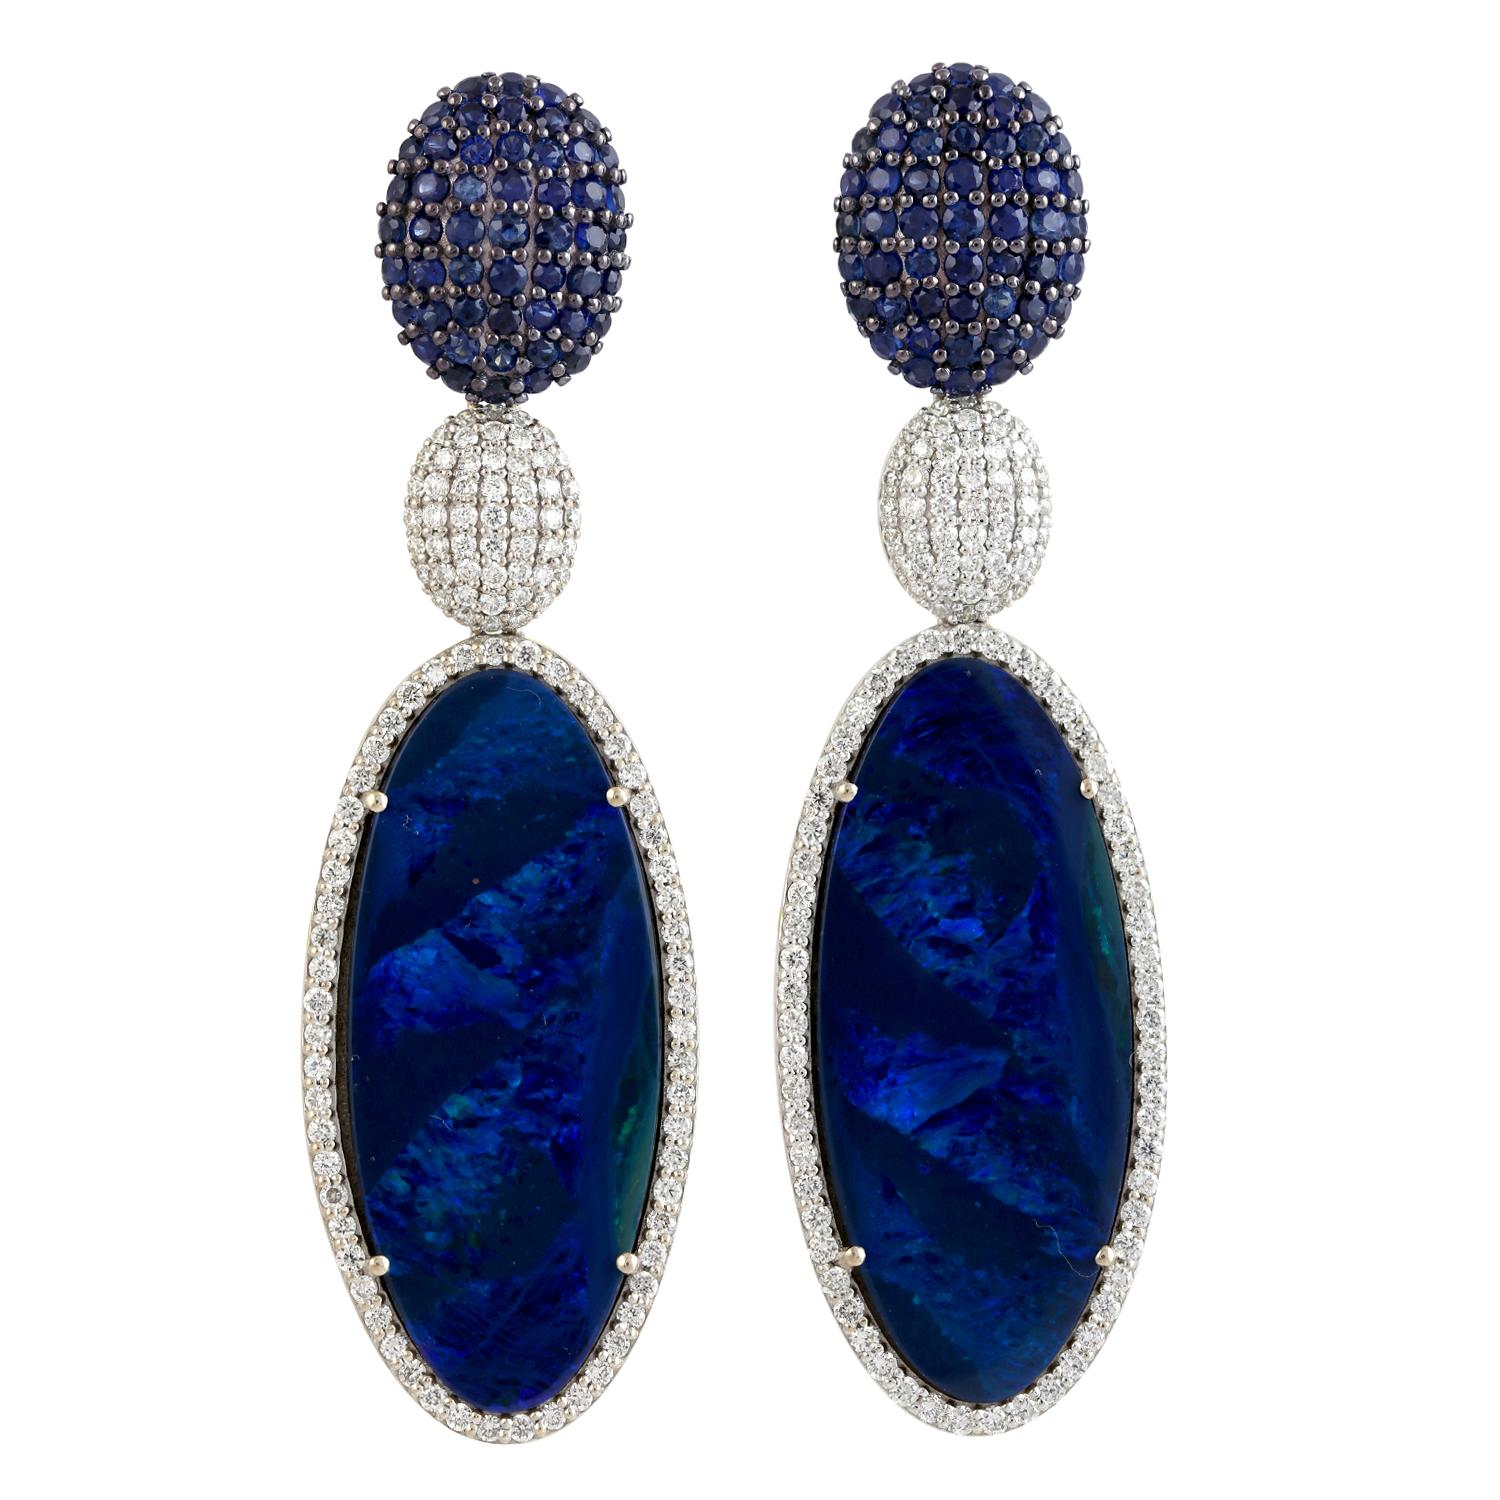 Mixed Cut Doublet Opal Dangle Earrings With Pave Sapphire & Diamonds In 18k White Gold For Sale